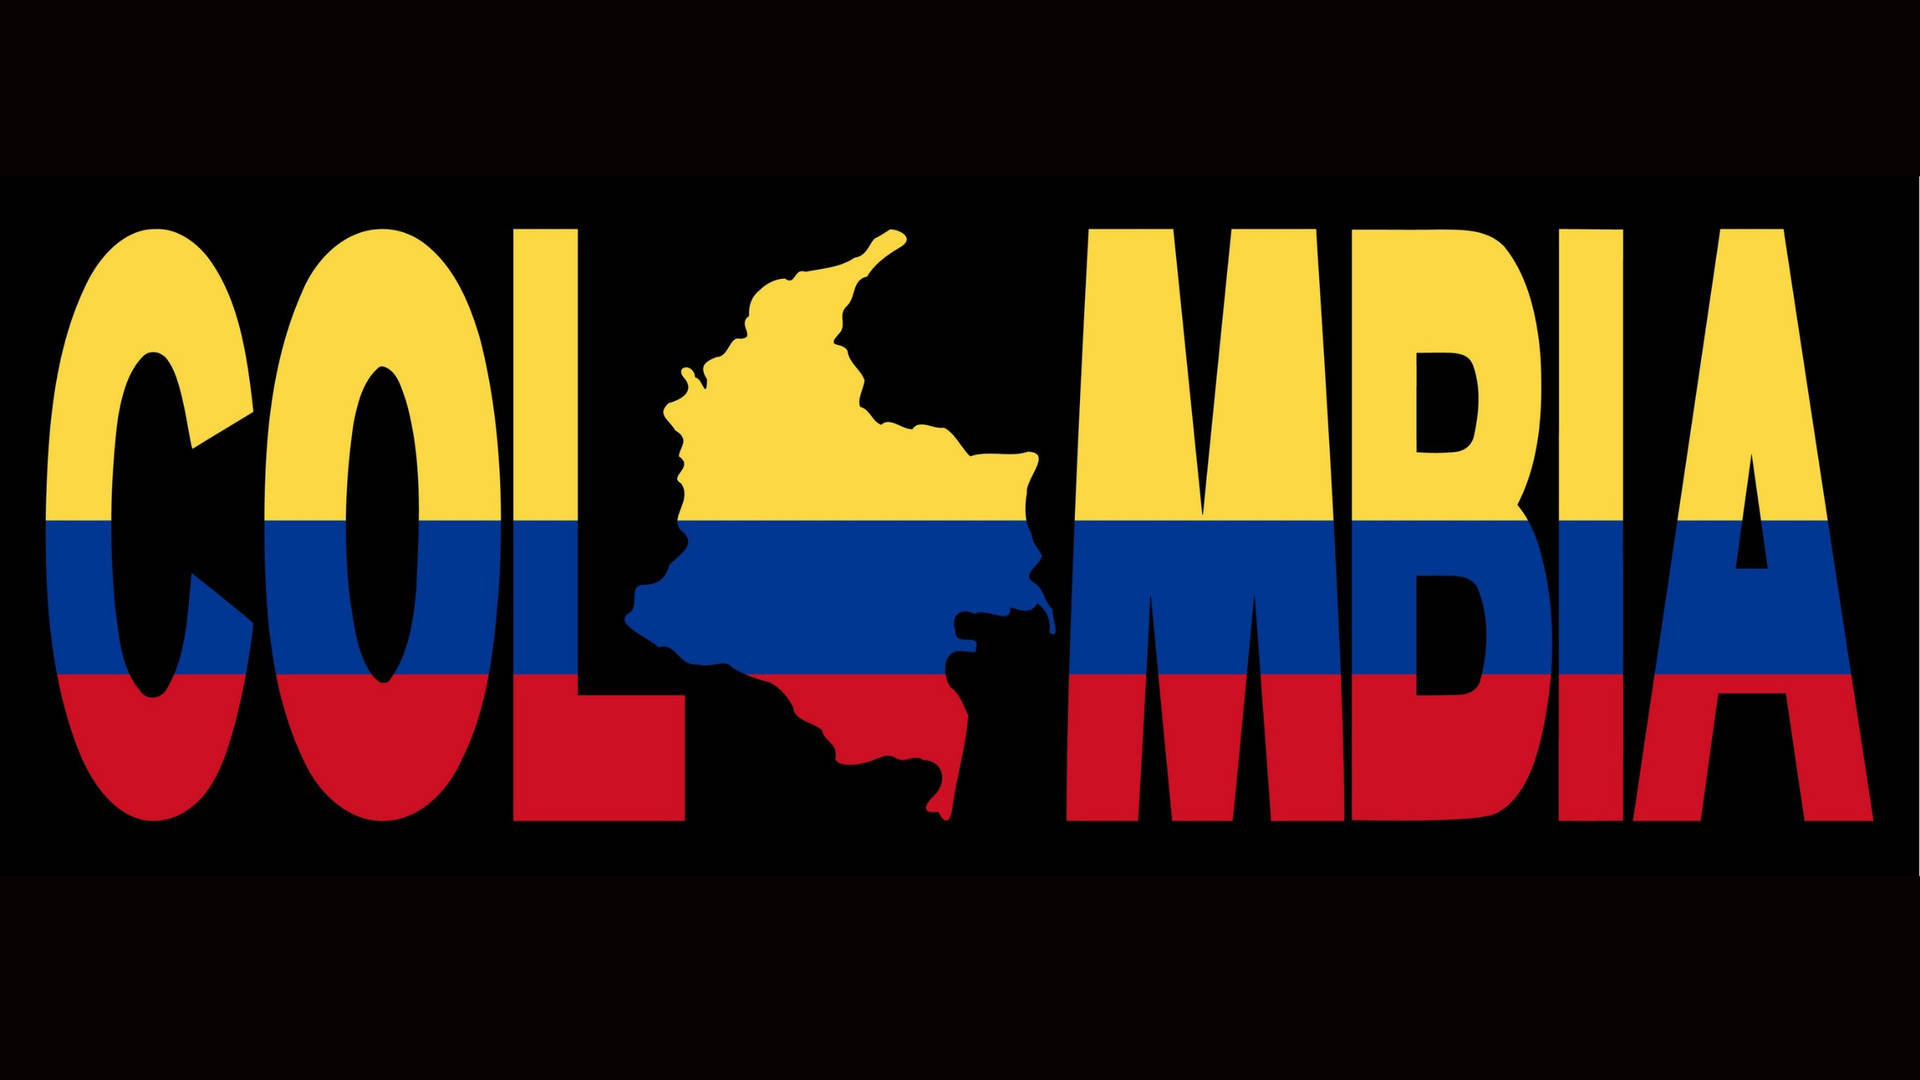 Colombia Flag And Map